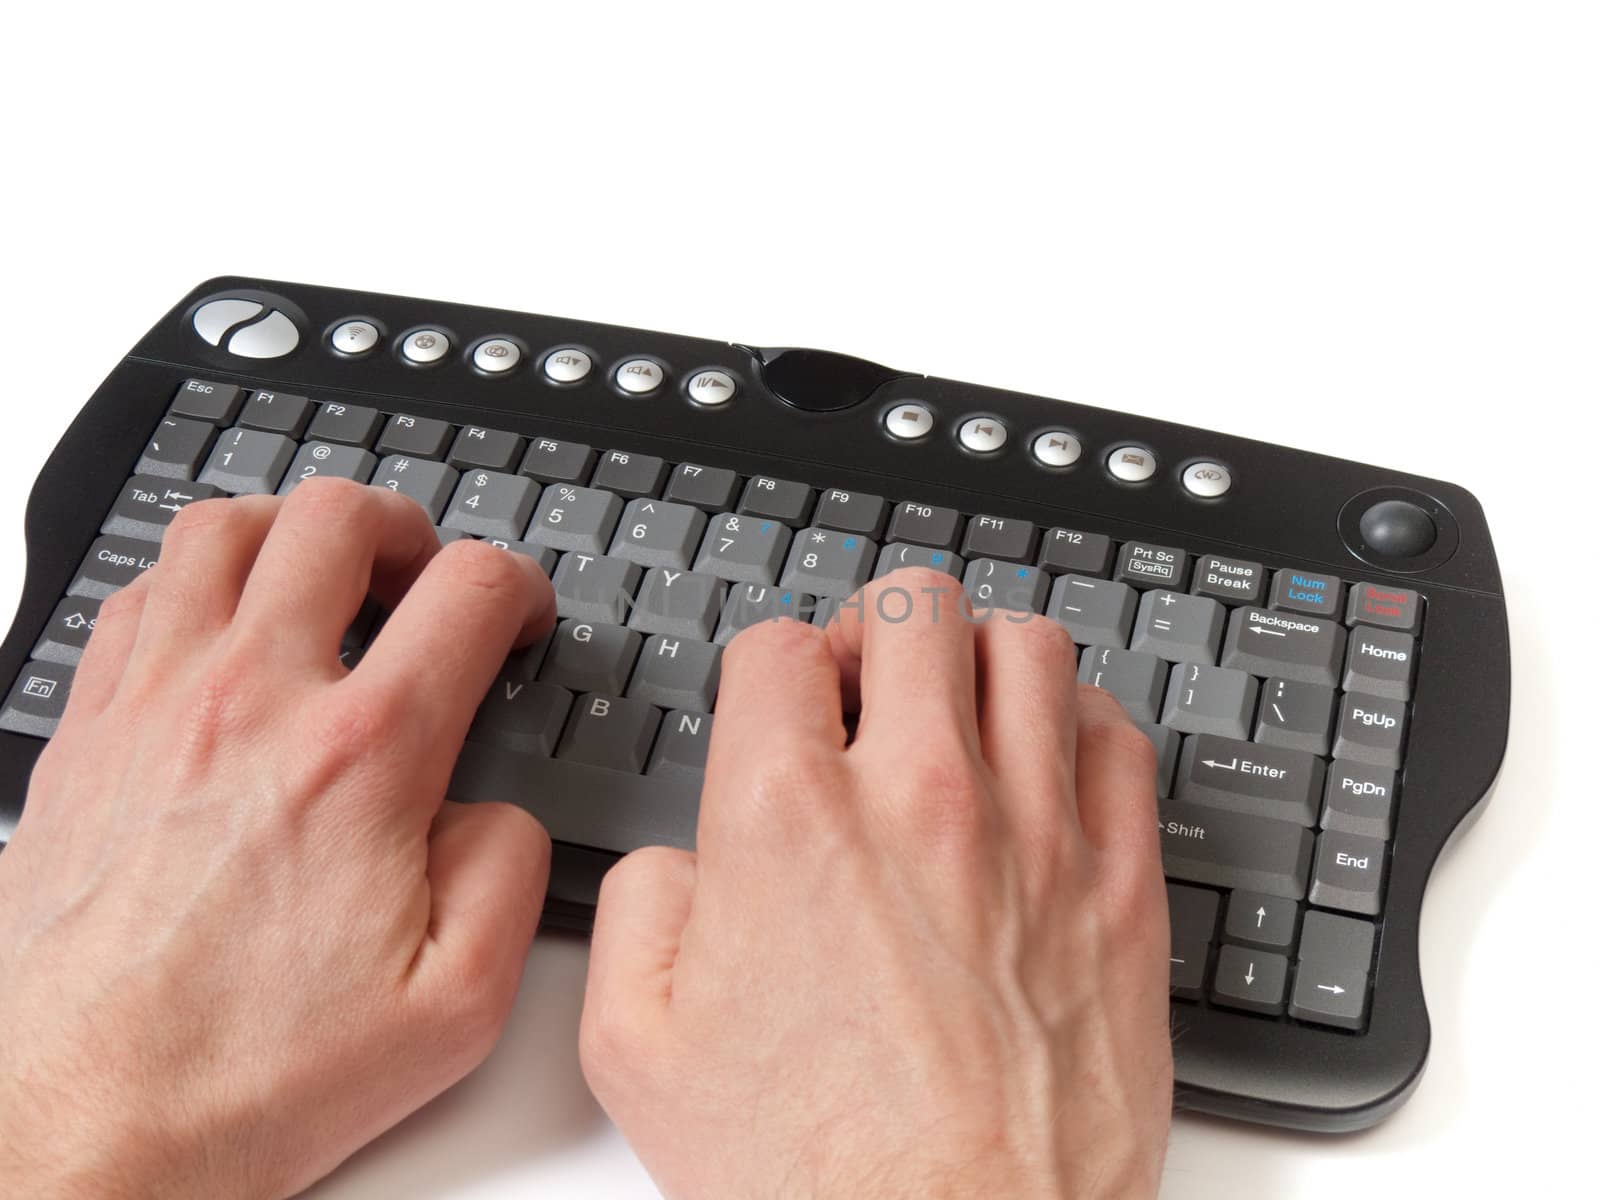 Hands in front of a compact black keyboard, on the home row, isolated on white.